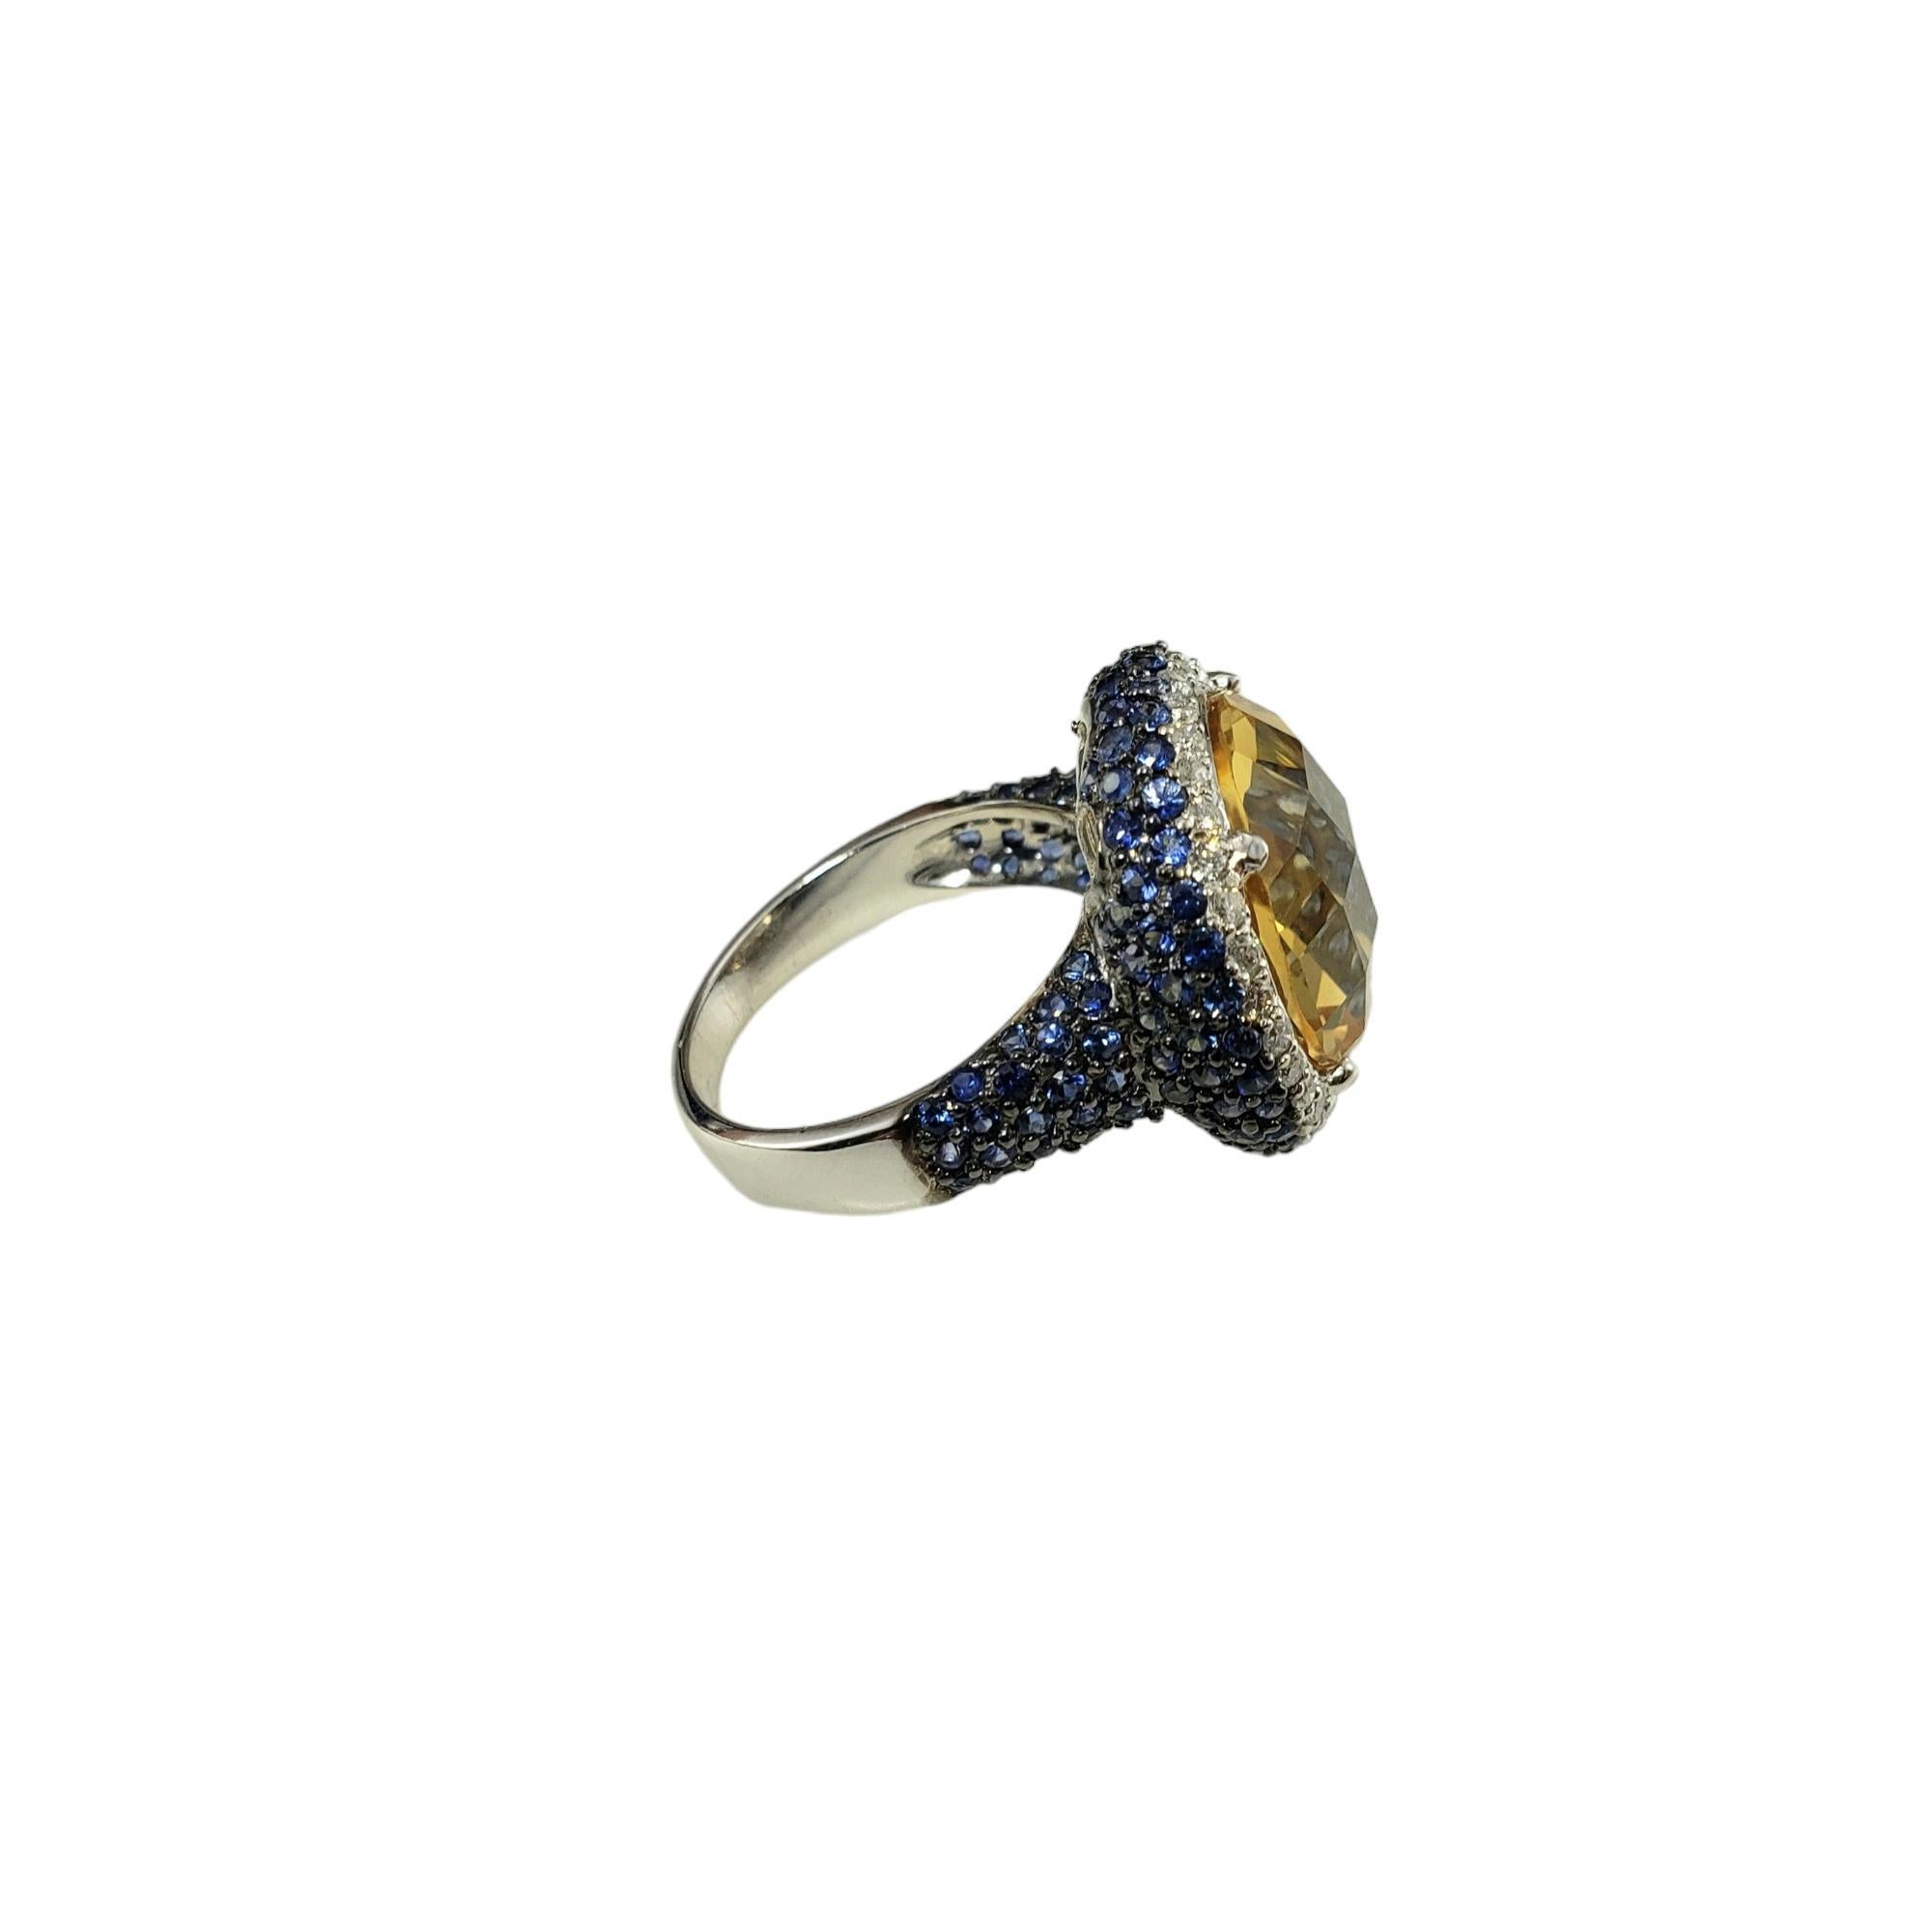 Round Cut 14K Gold Citrine, Diamond, Sapphire Ring Size 7.25 #16339 For Sale